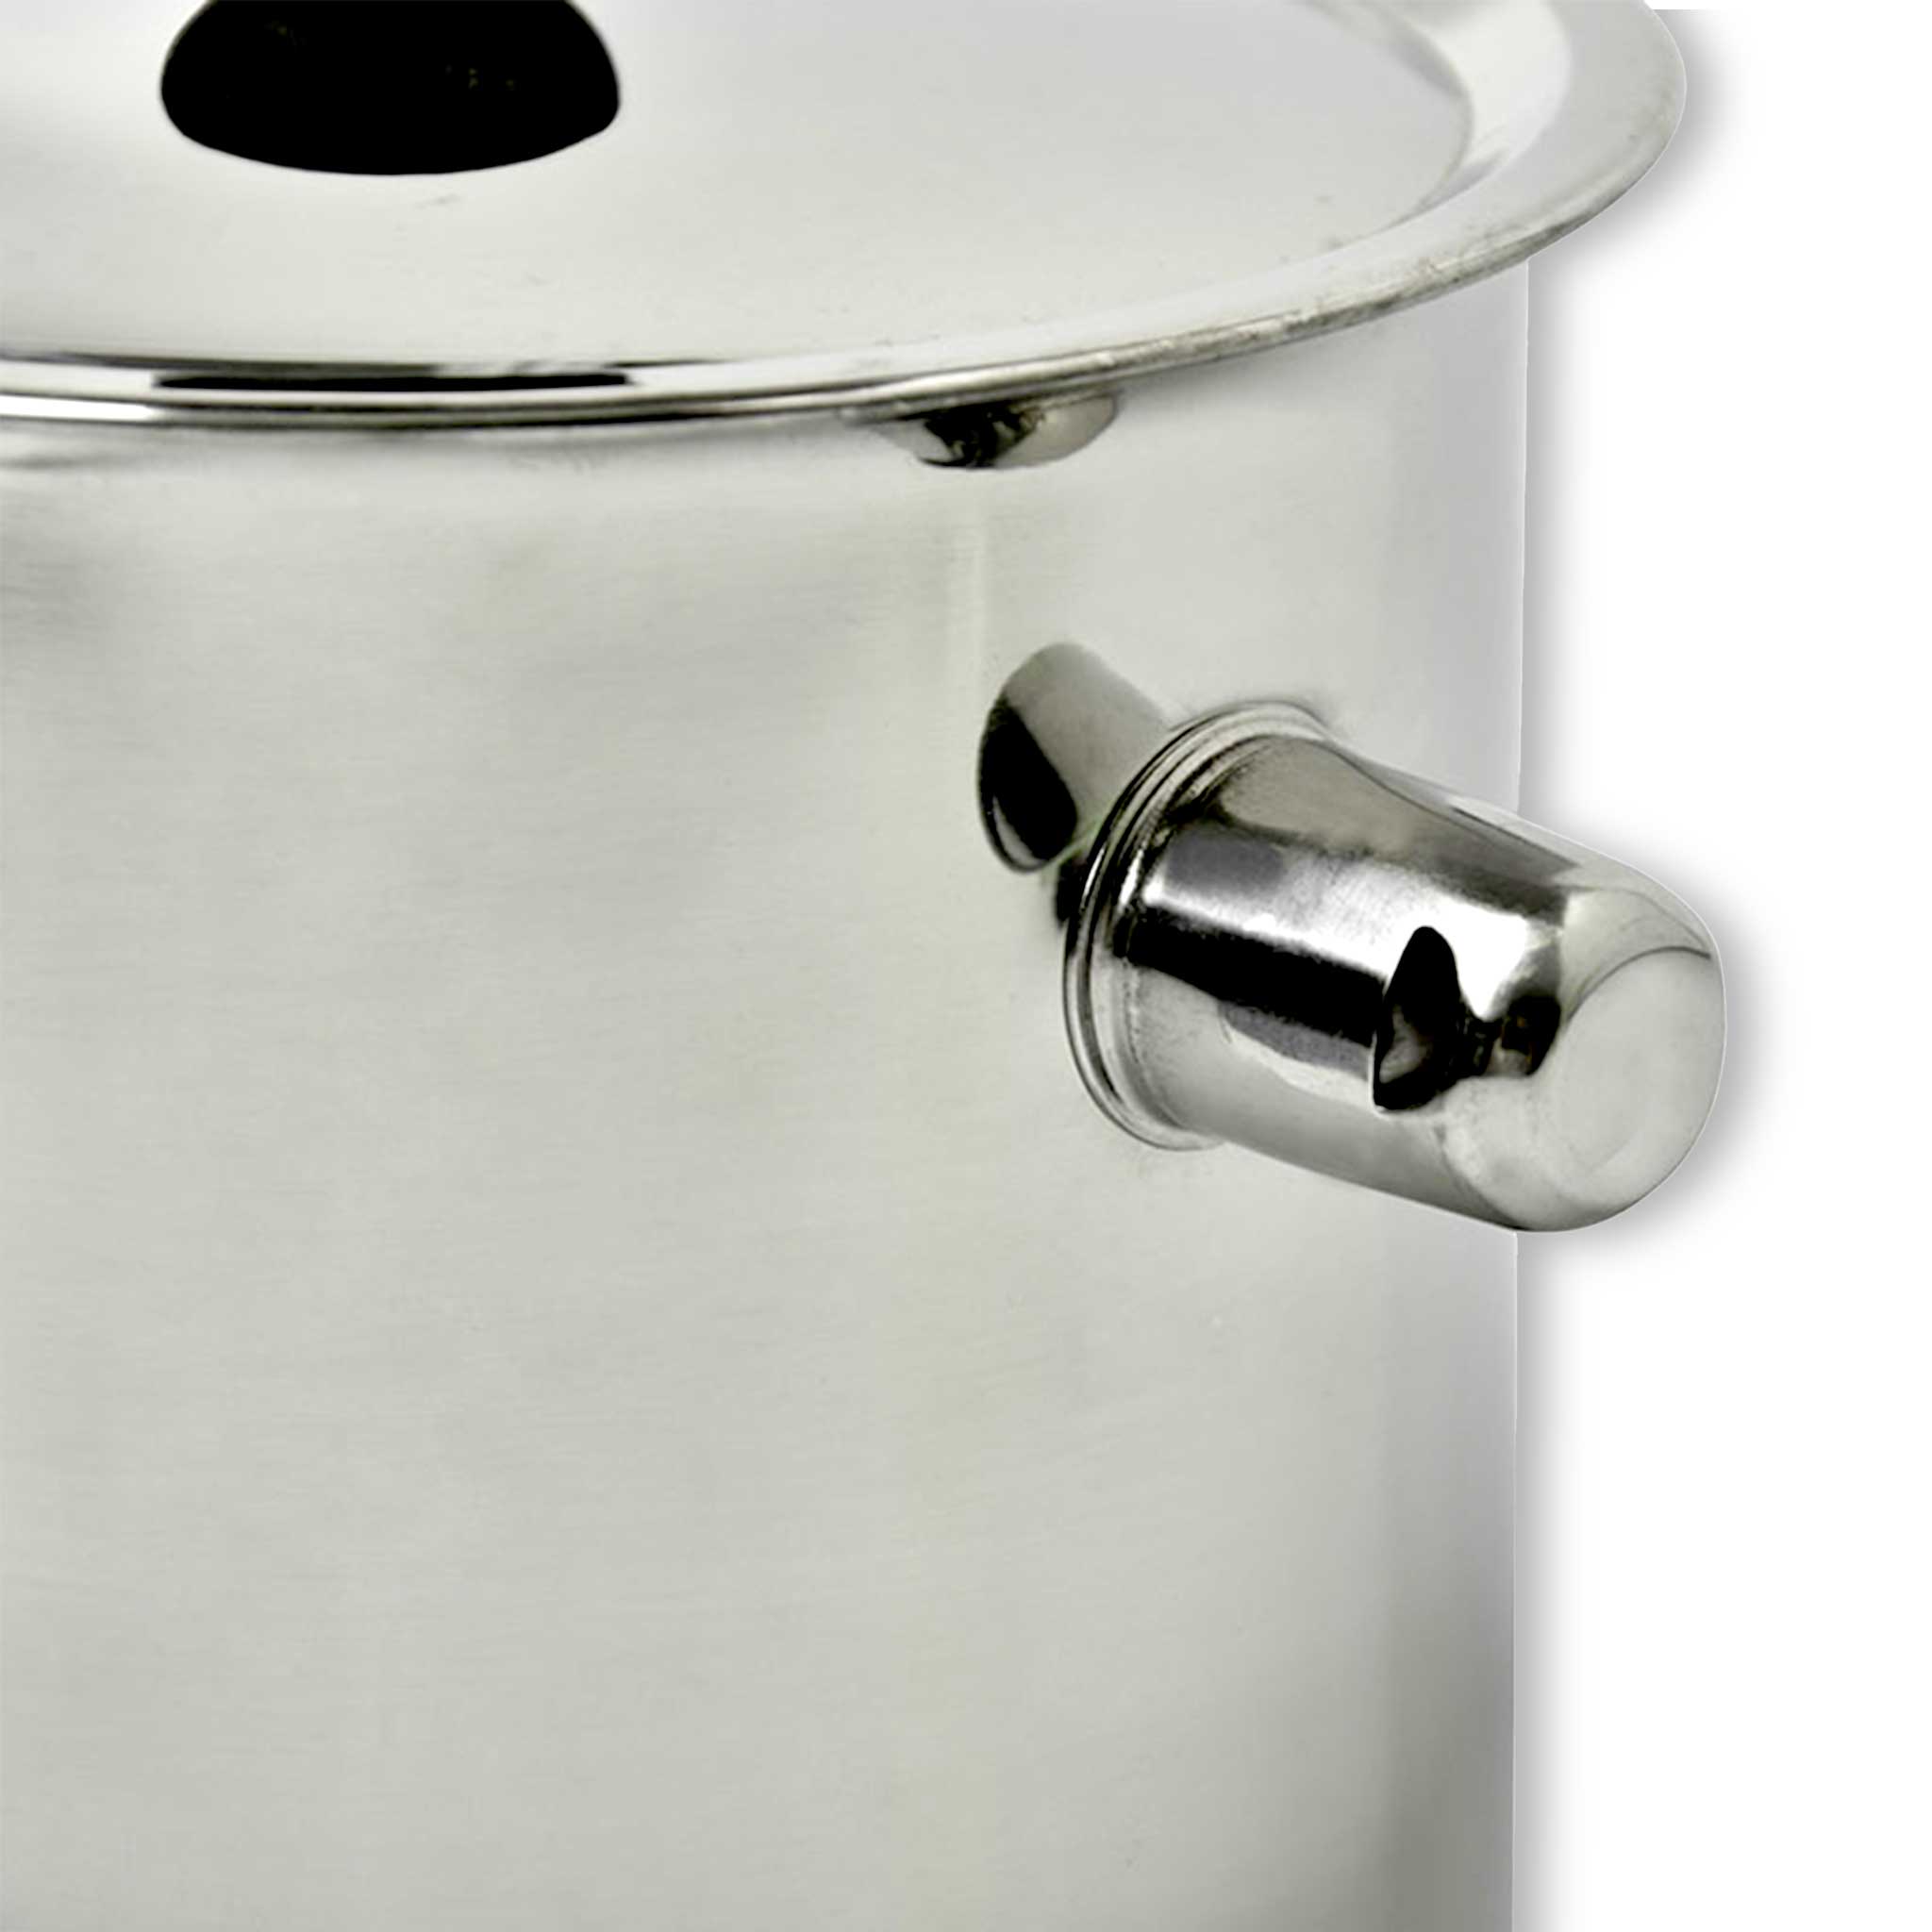 Bees Wax Melter Double Boiler Stainless-steel 2.5L - Processing collection by Buzzbee Beekeeping Supplies